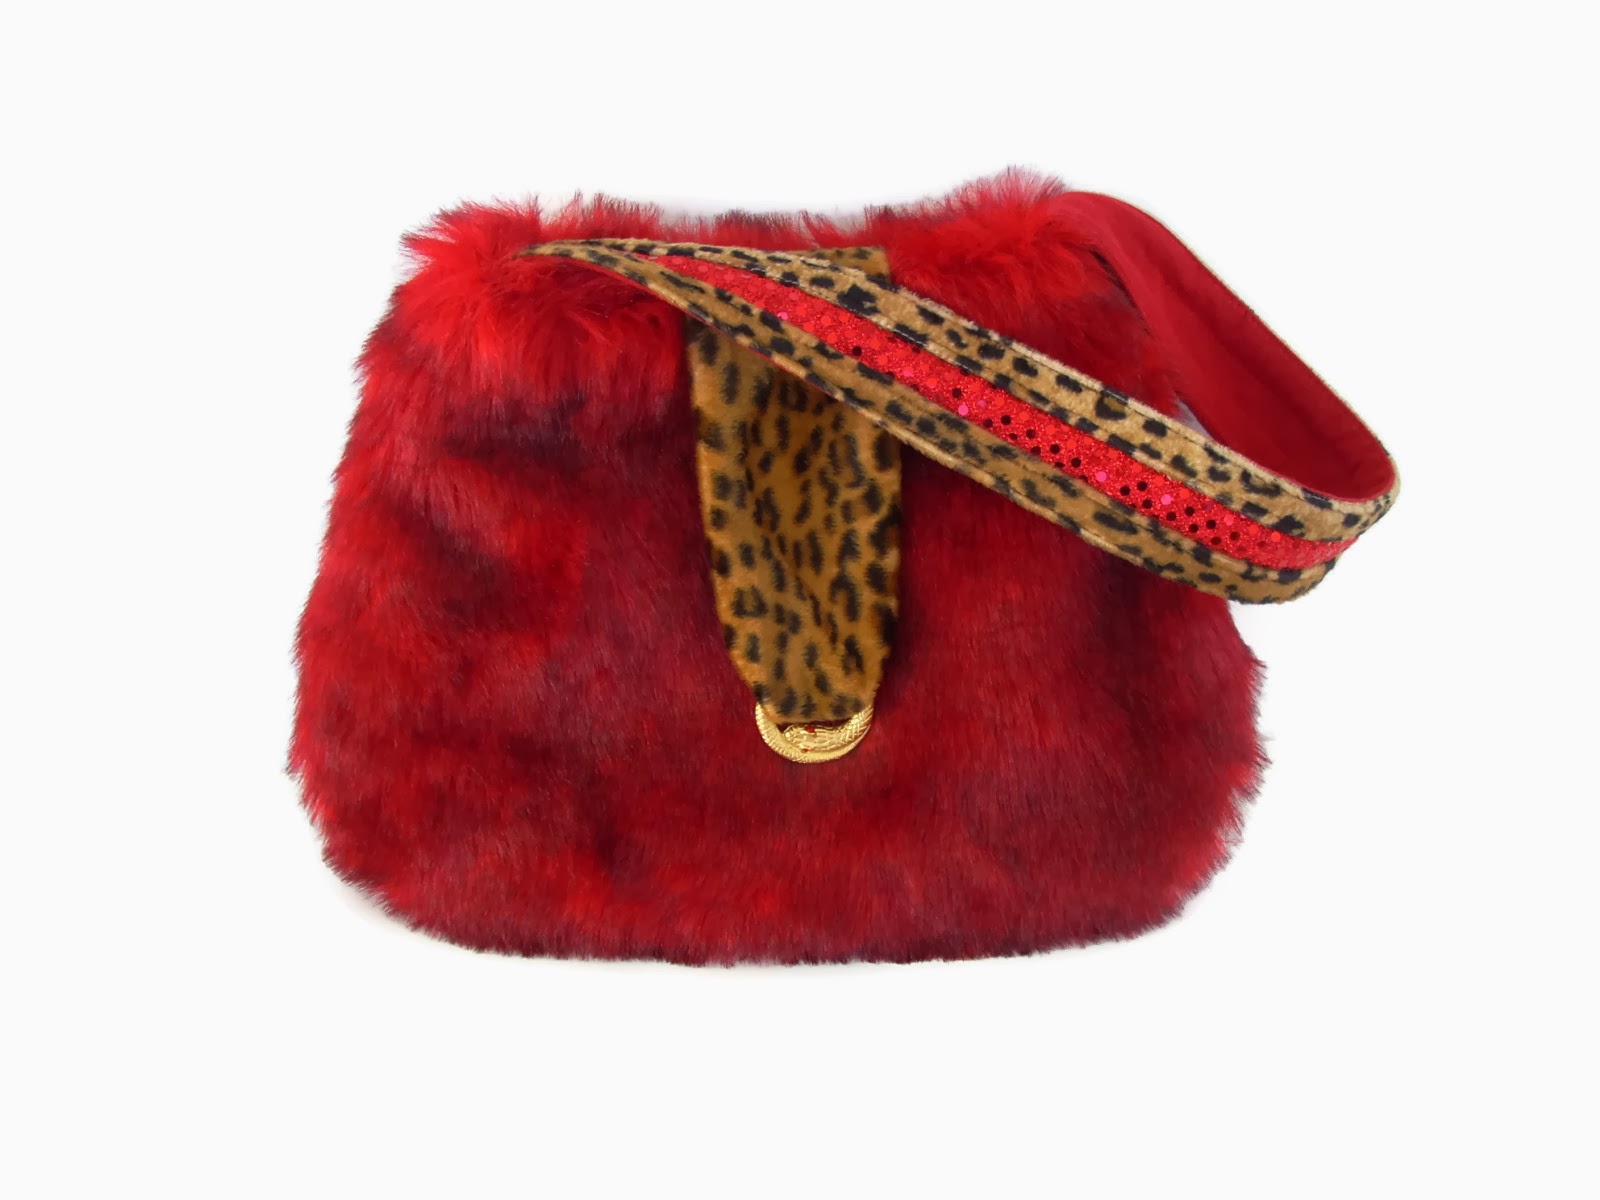  Ruby Red Sequin and Cheetah Medium Cozy Bag